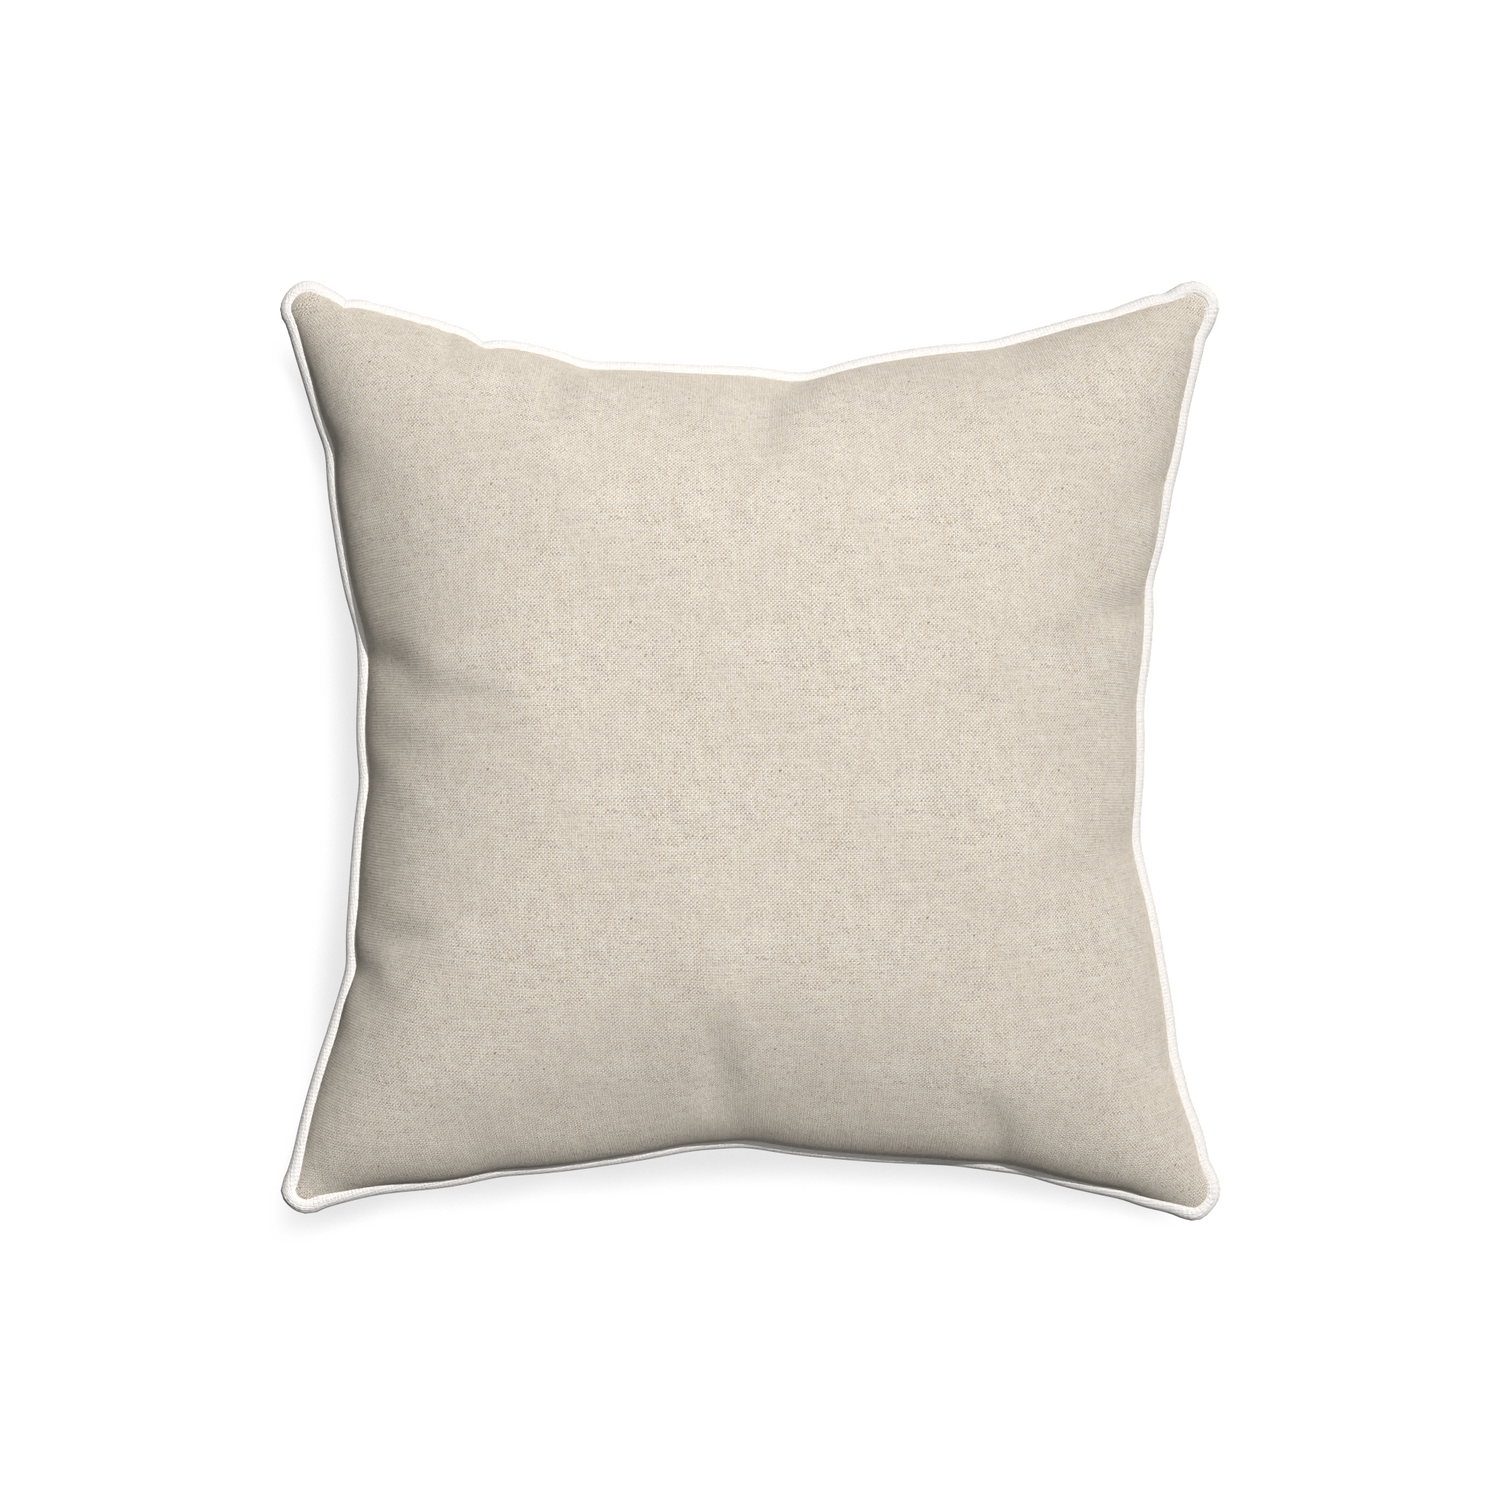 20-square oat custom pillow with snow piping on white background